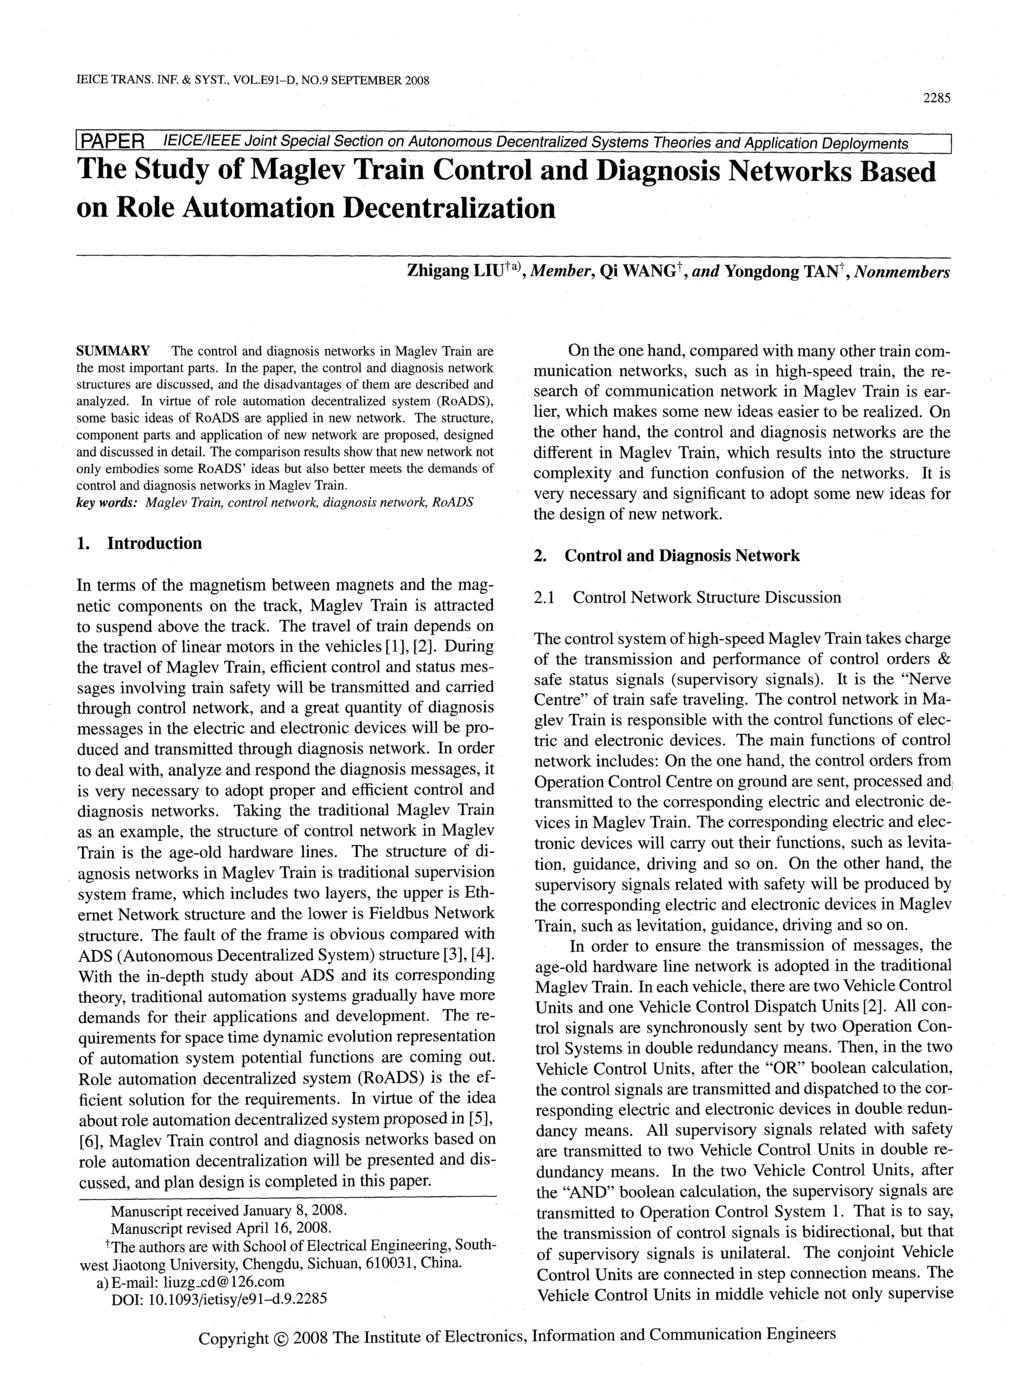 PAPER IEICE/IEEE Joint Special Section on Autonomous Decentralized Systems Theories and Application Deployments The Study of Maglev Train Control and Diagnosis Networks Based on Role Automation